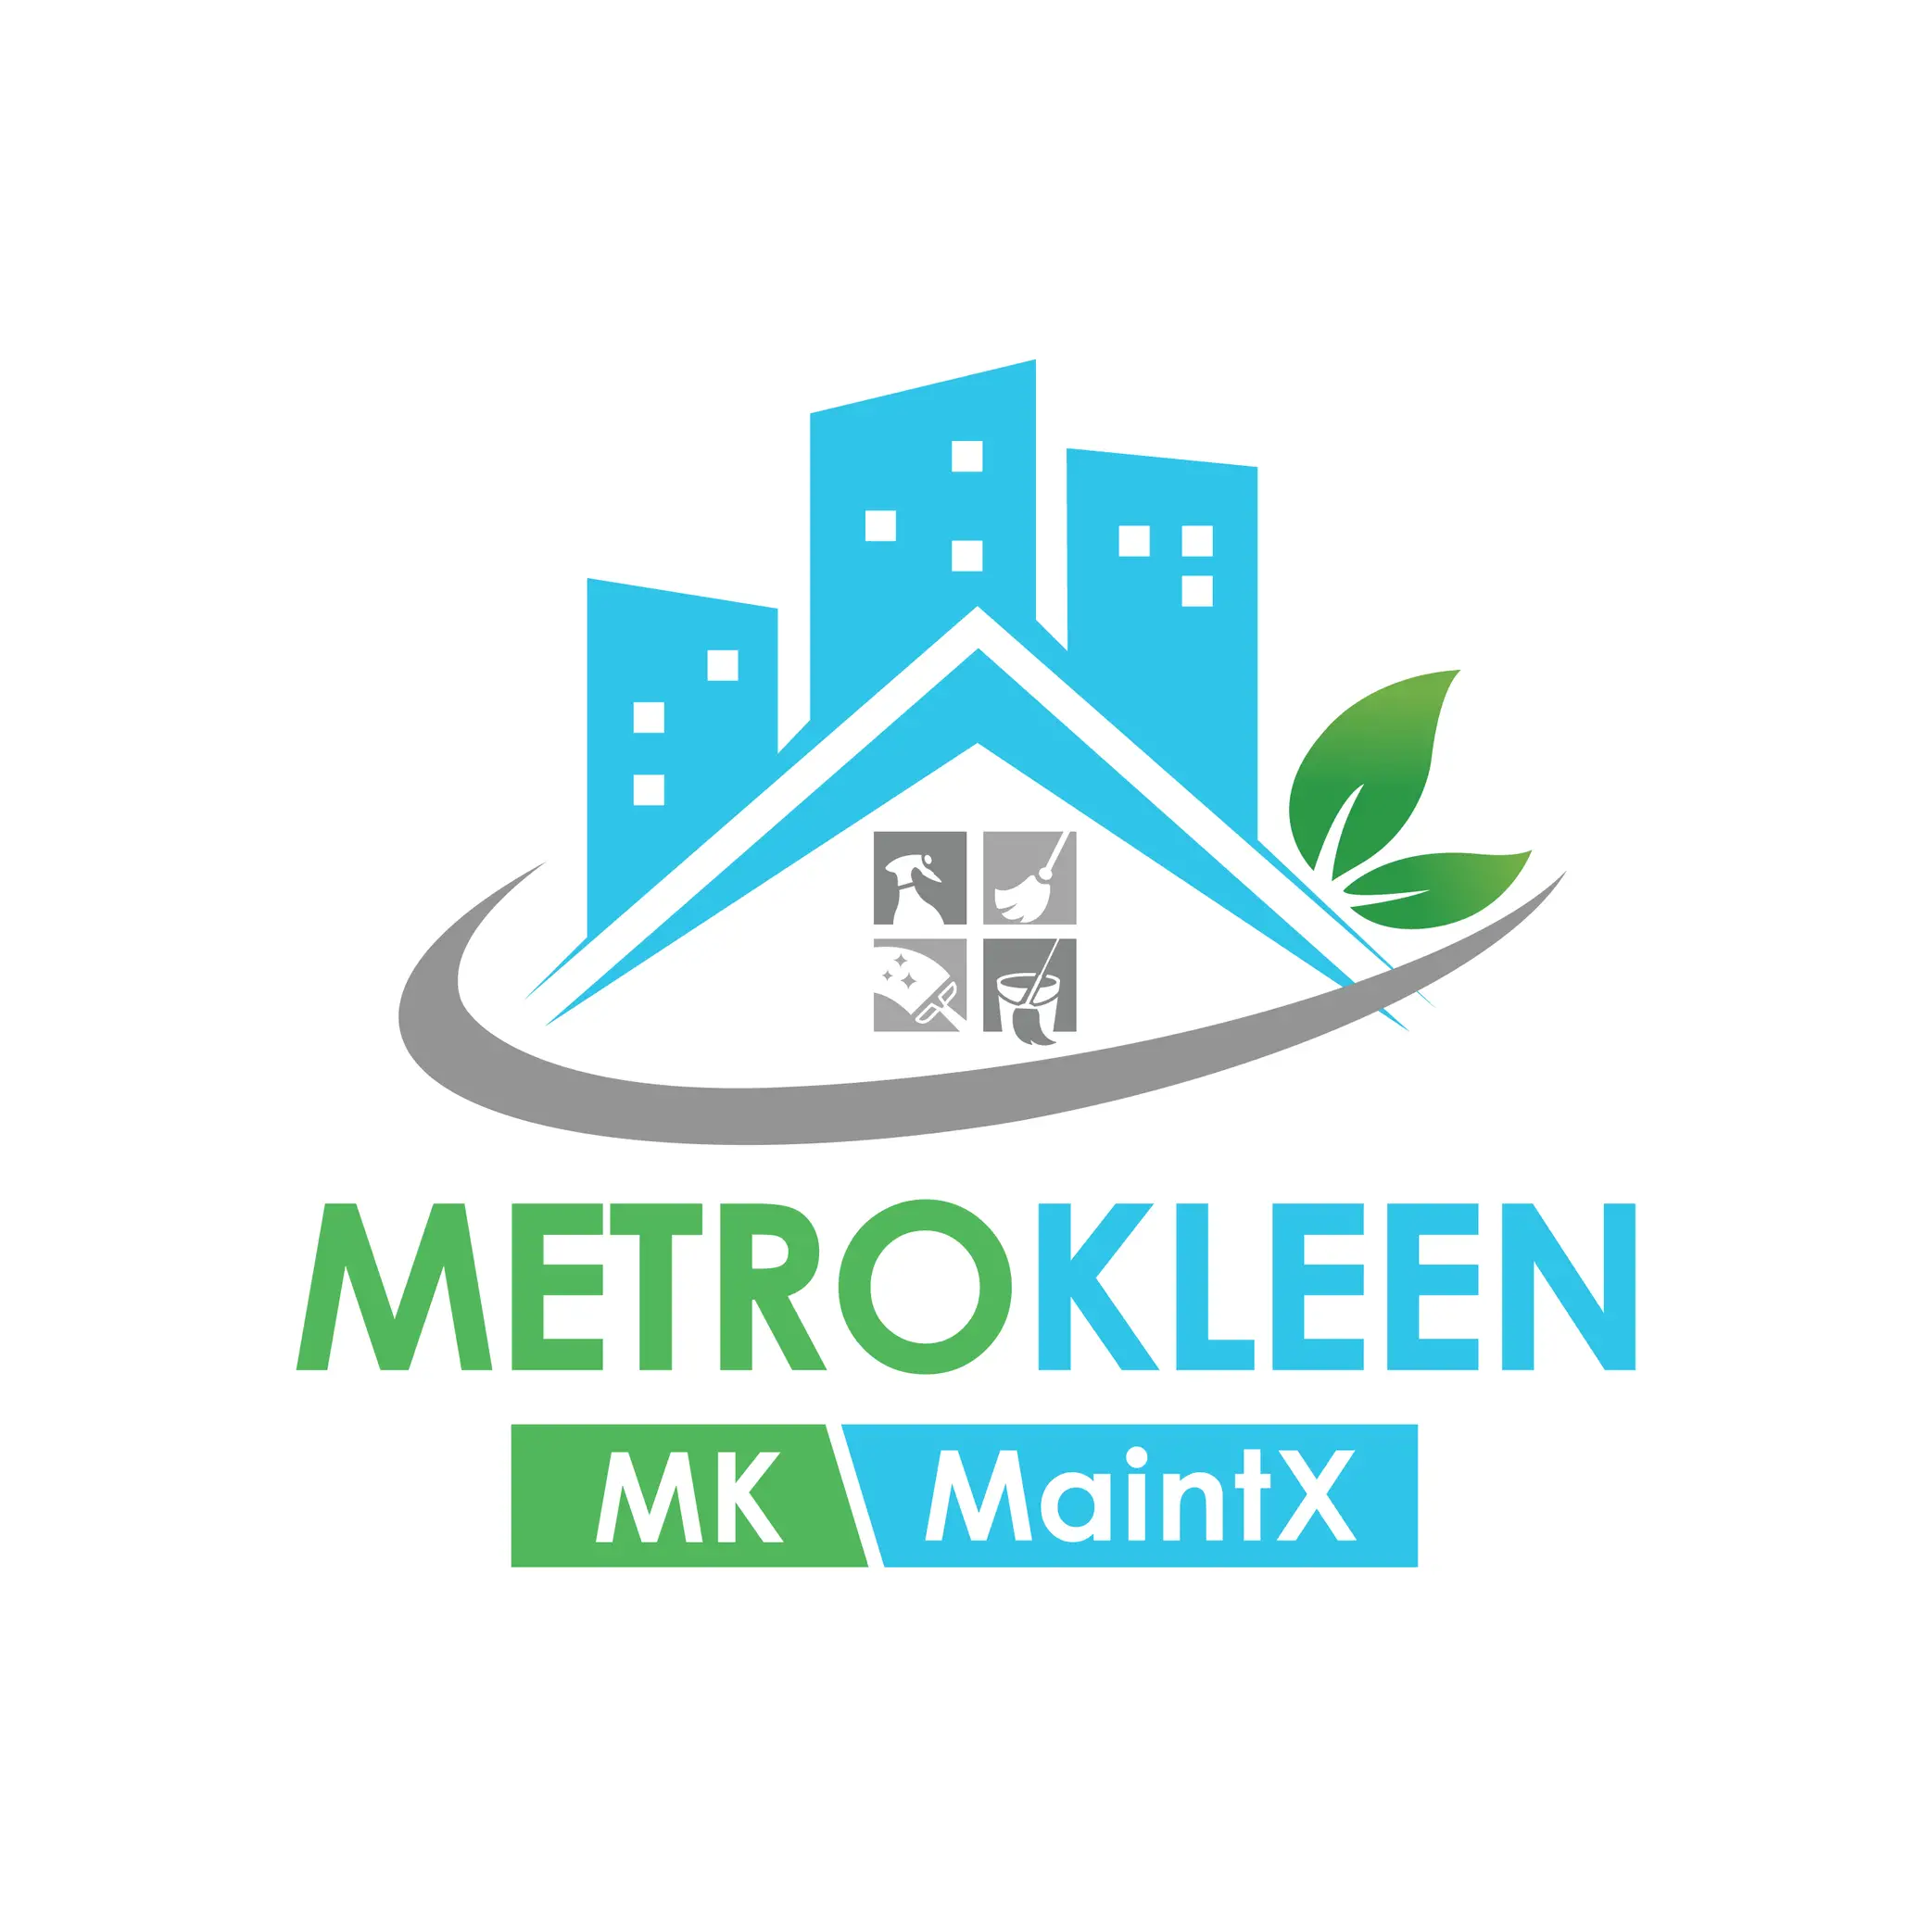 MetroKleen|MKMaintX: Empowering Businesses through Exceptional Commercial Cleaning Services